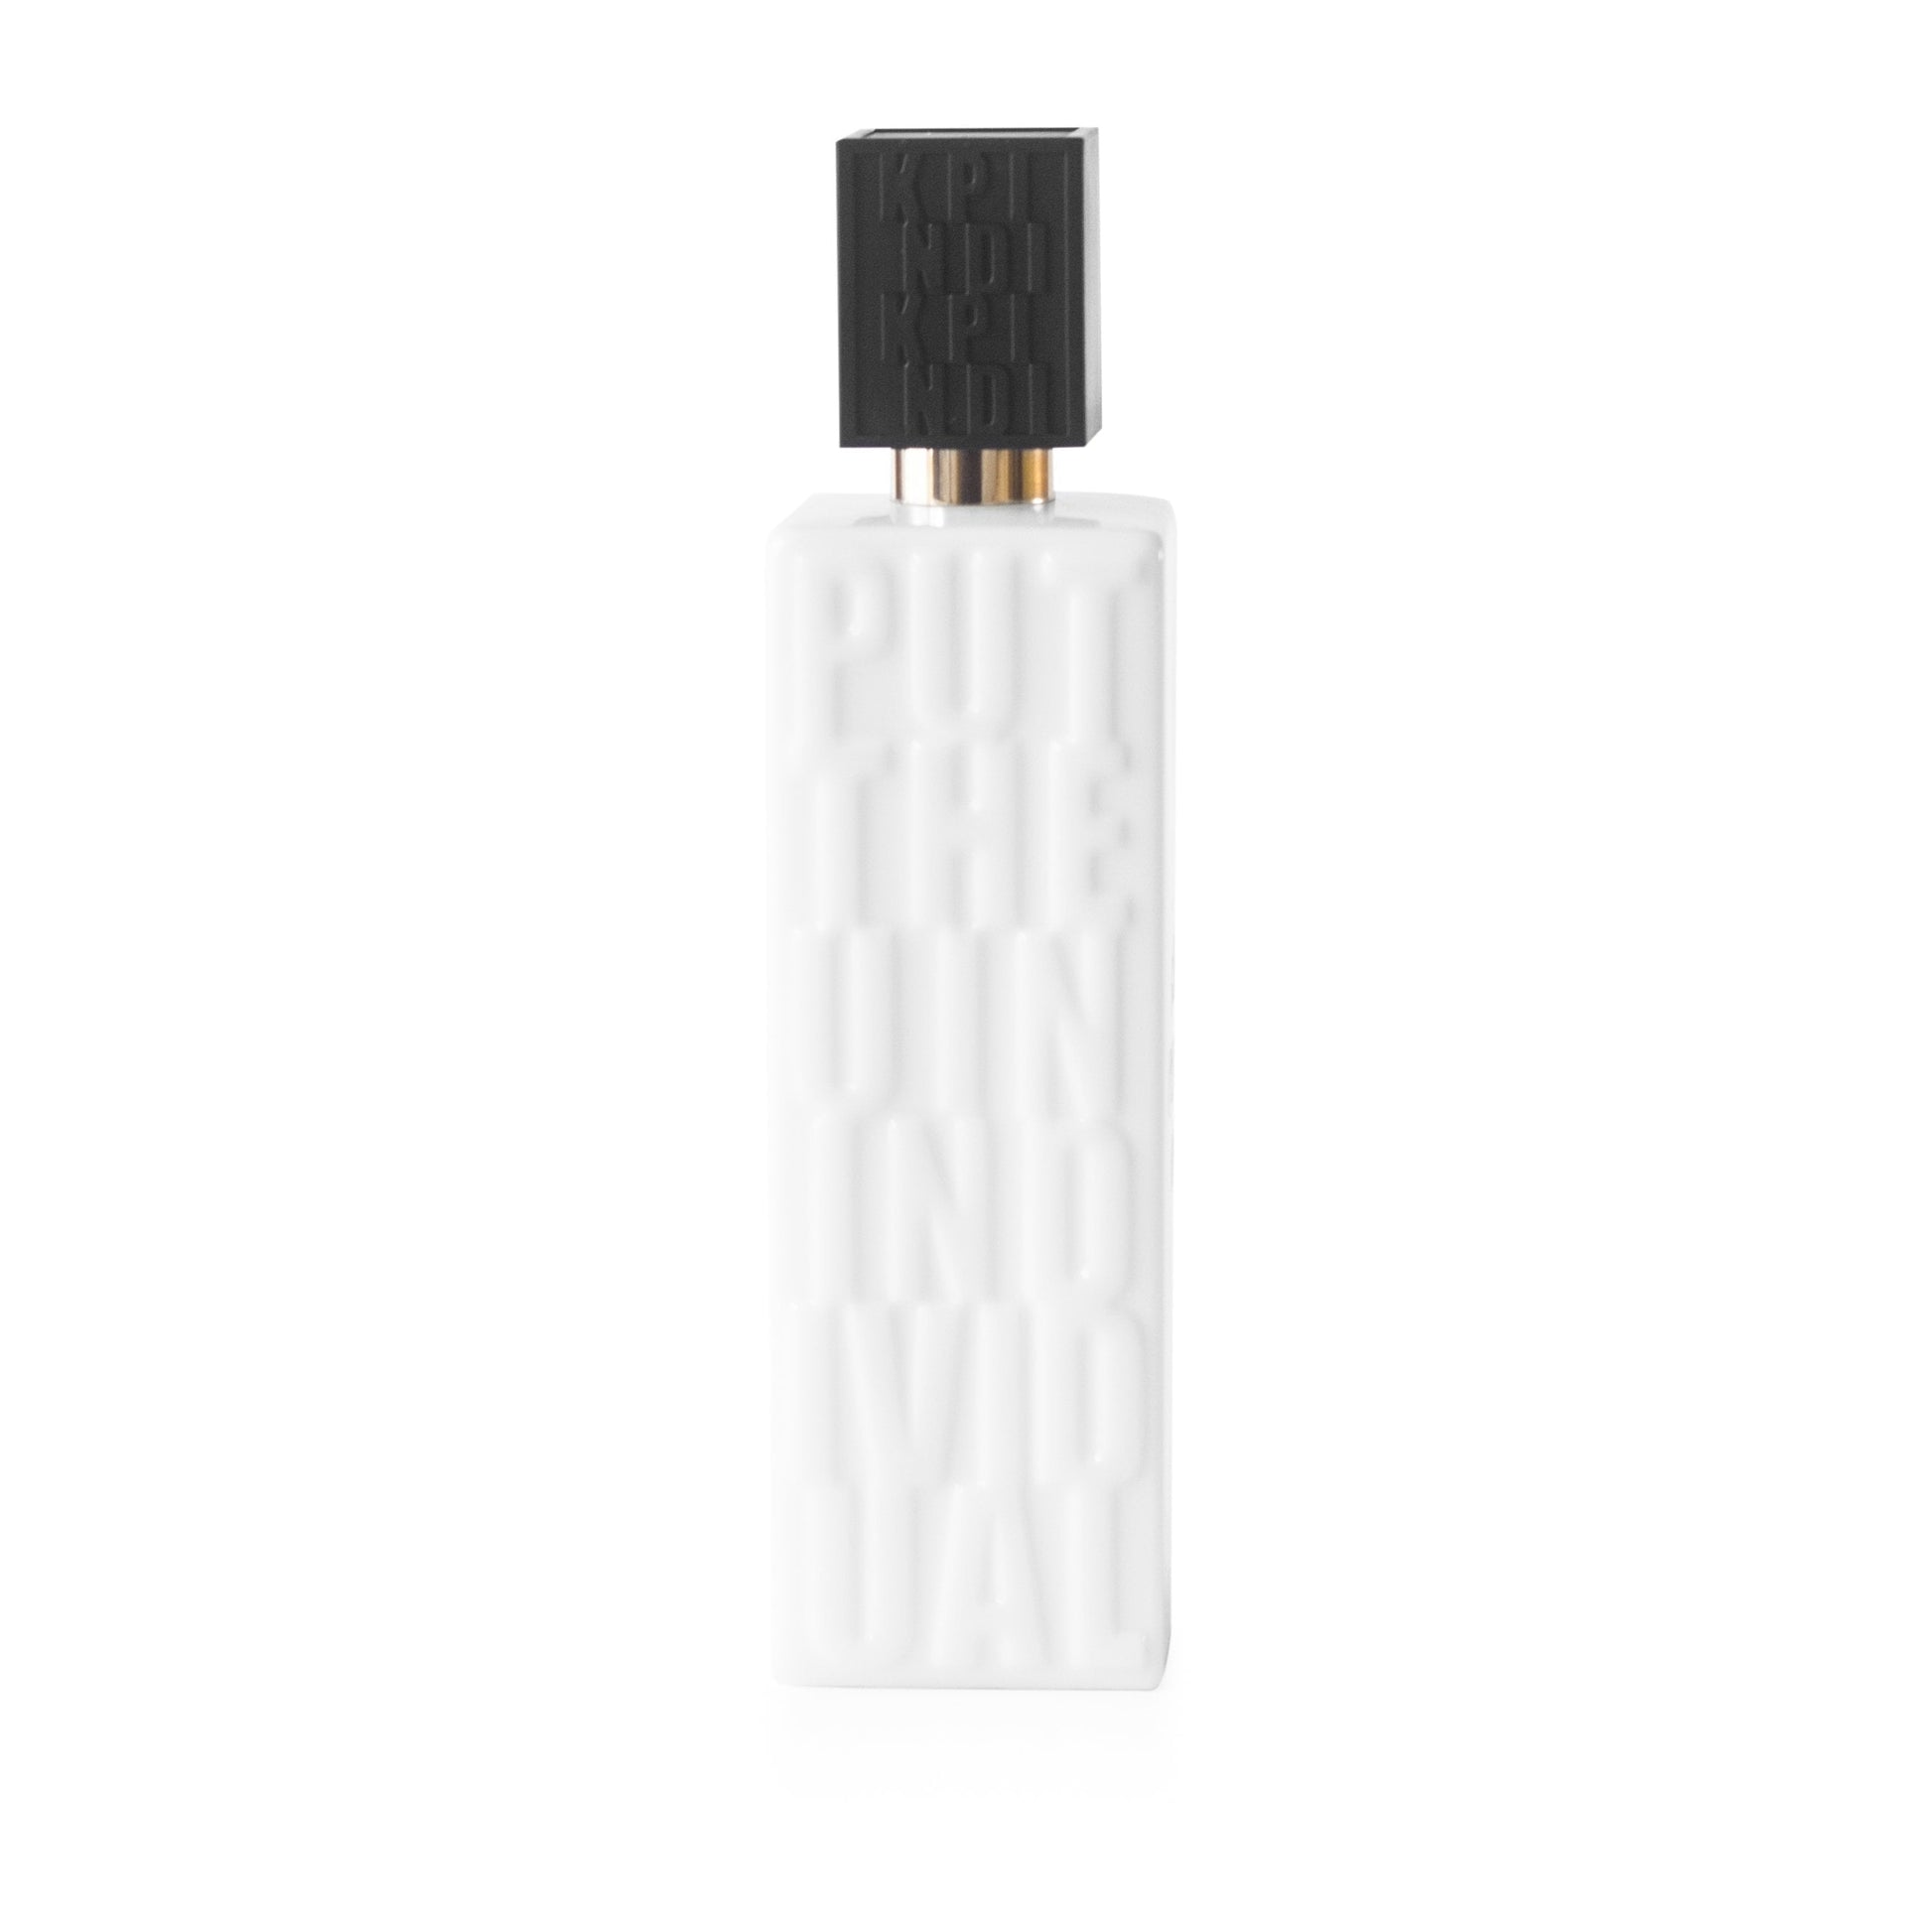 Katy Perry's Indi Eau de Parfum Spray for Women by Katy Perry, Product image 2